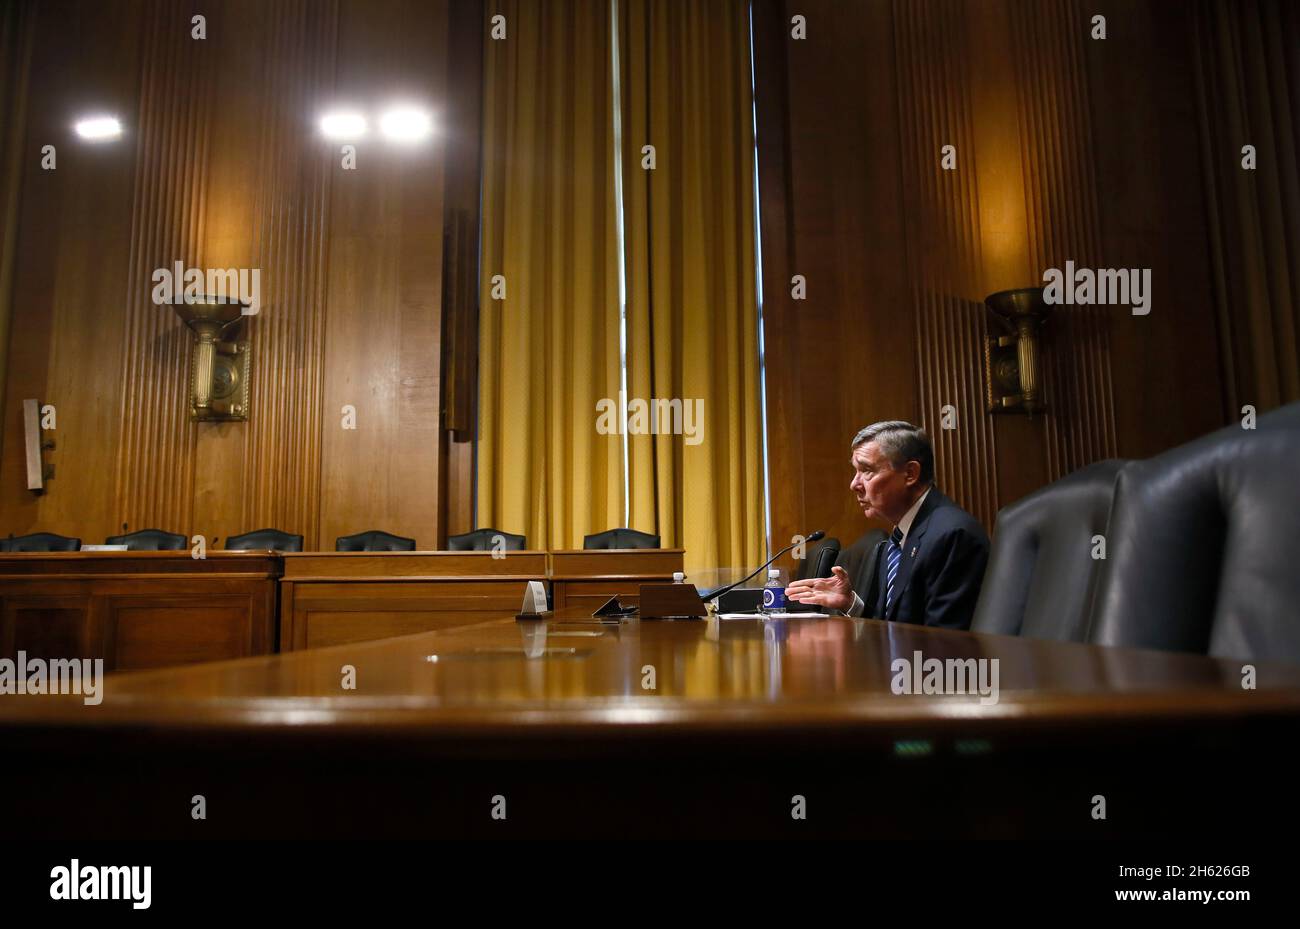 U.S. Customs and Border Protection Commissioner R. Gil Kerlikowske testifies before the U.S. Senate Committee on Finance in Washington, D.C., May 11, 2016. Stock Photo